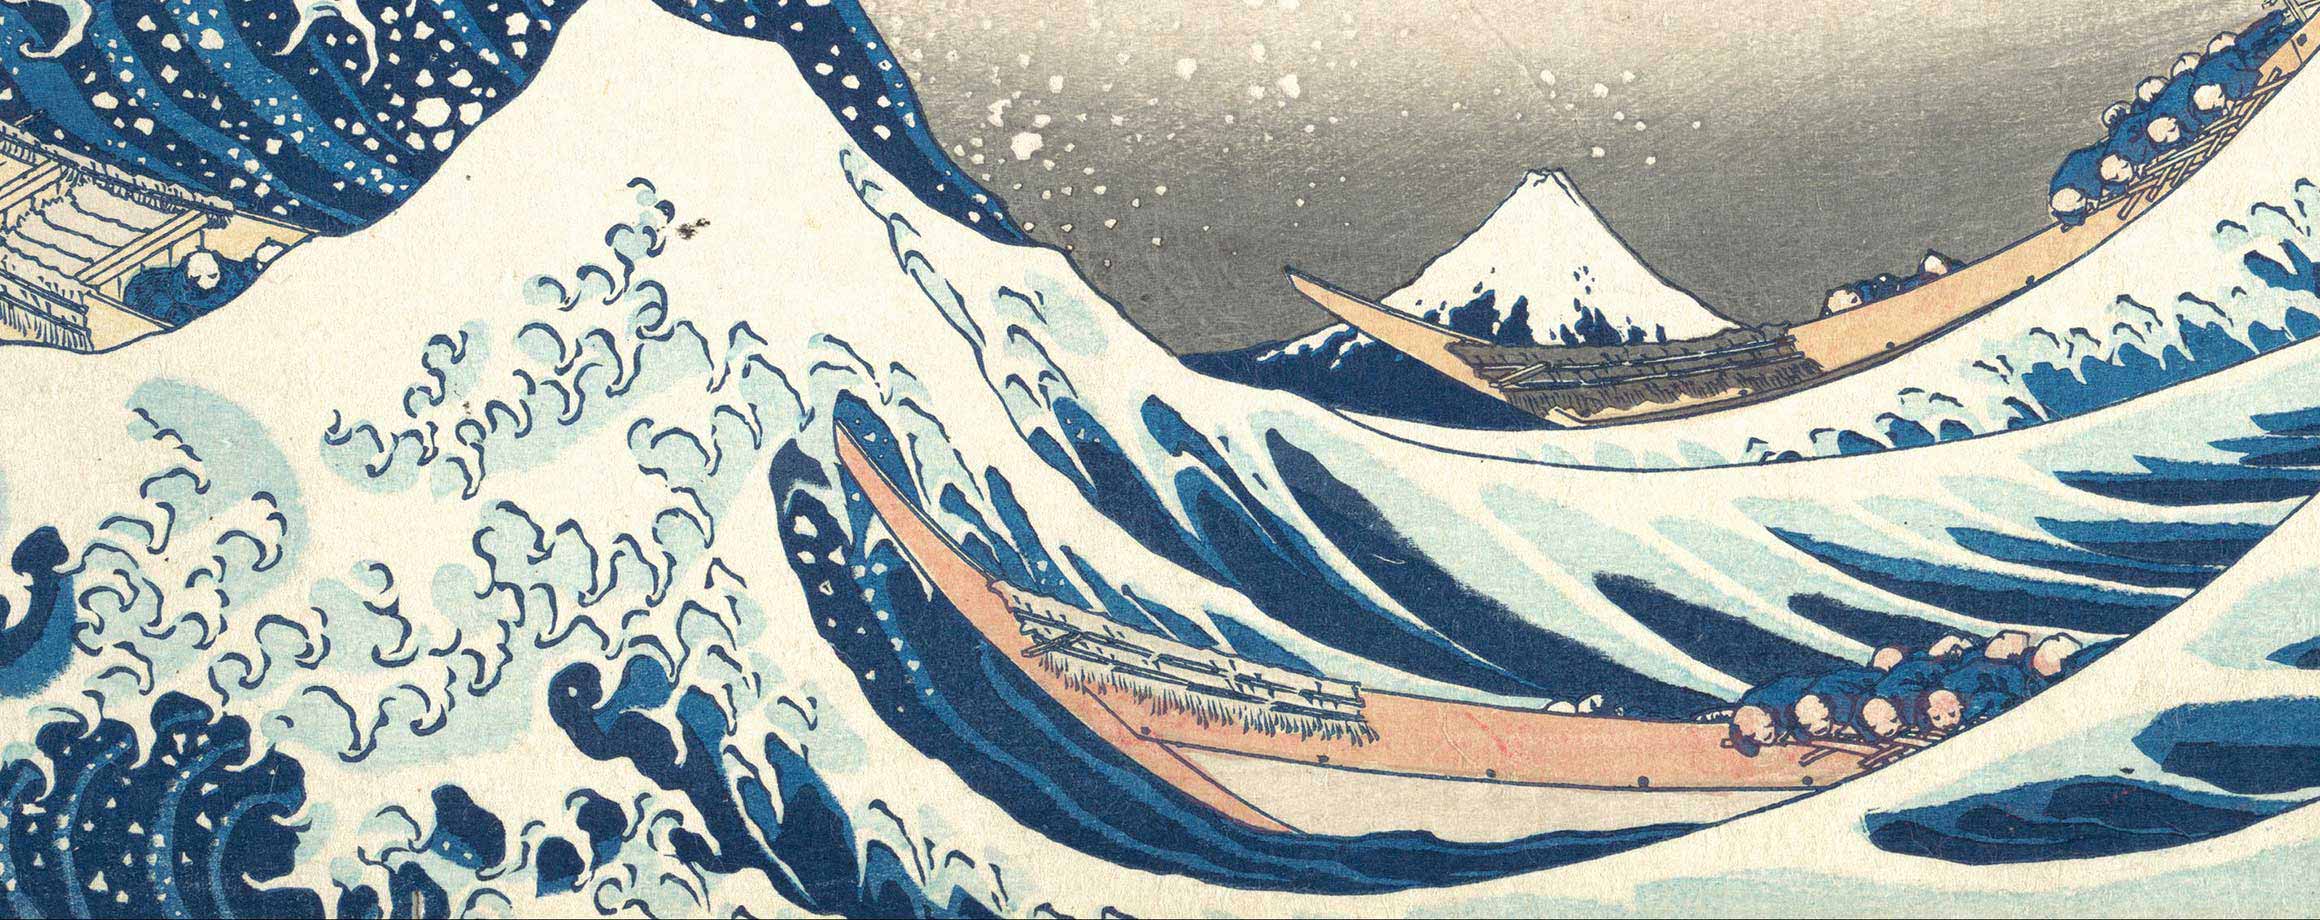 A Great Wave of Hokusai, At the Smithsonian